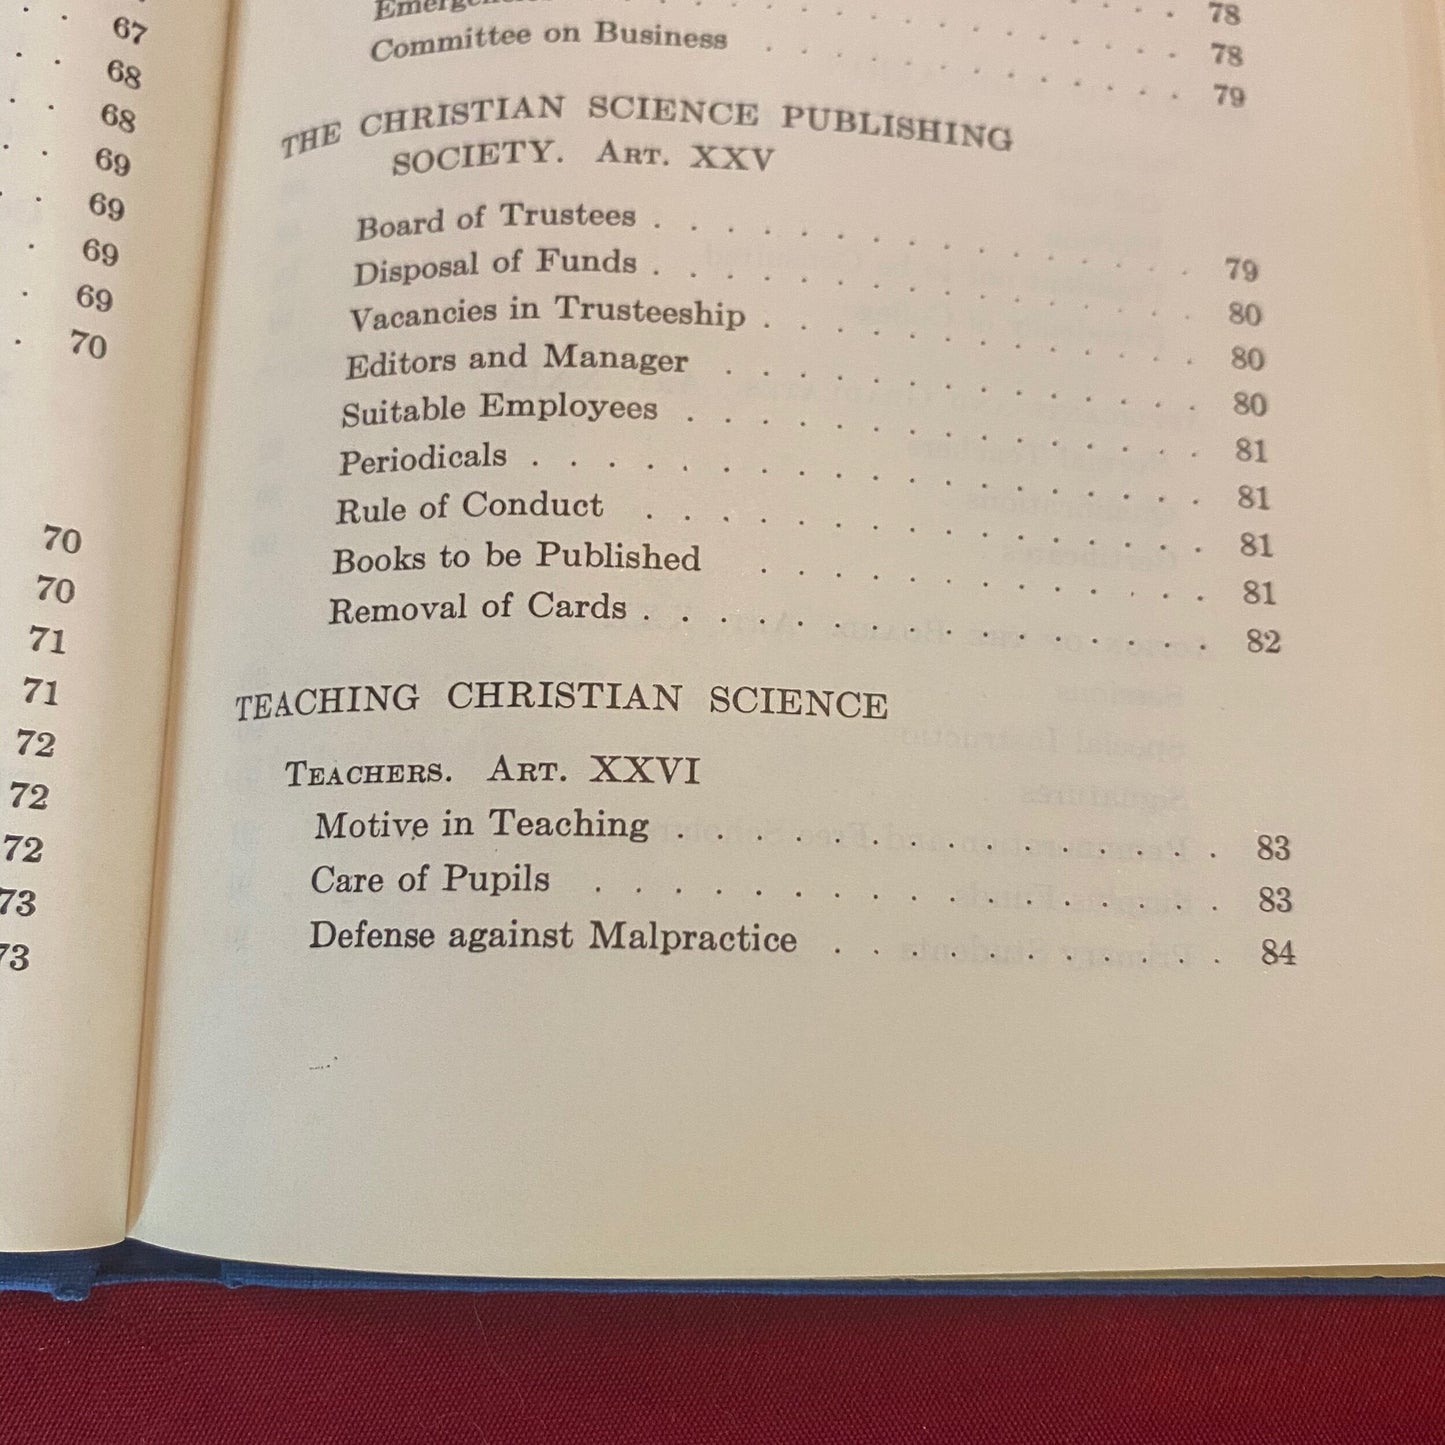 Manual of the Mother Church The First Church of Christ Scientist